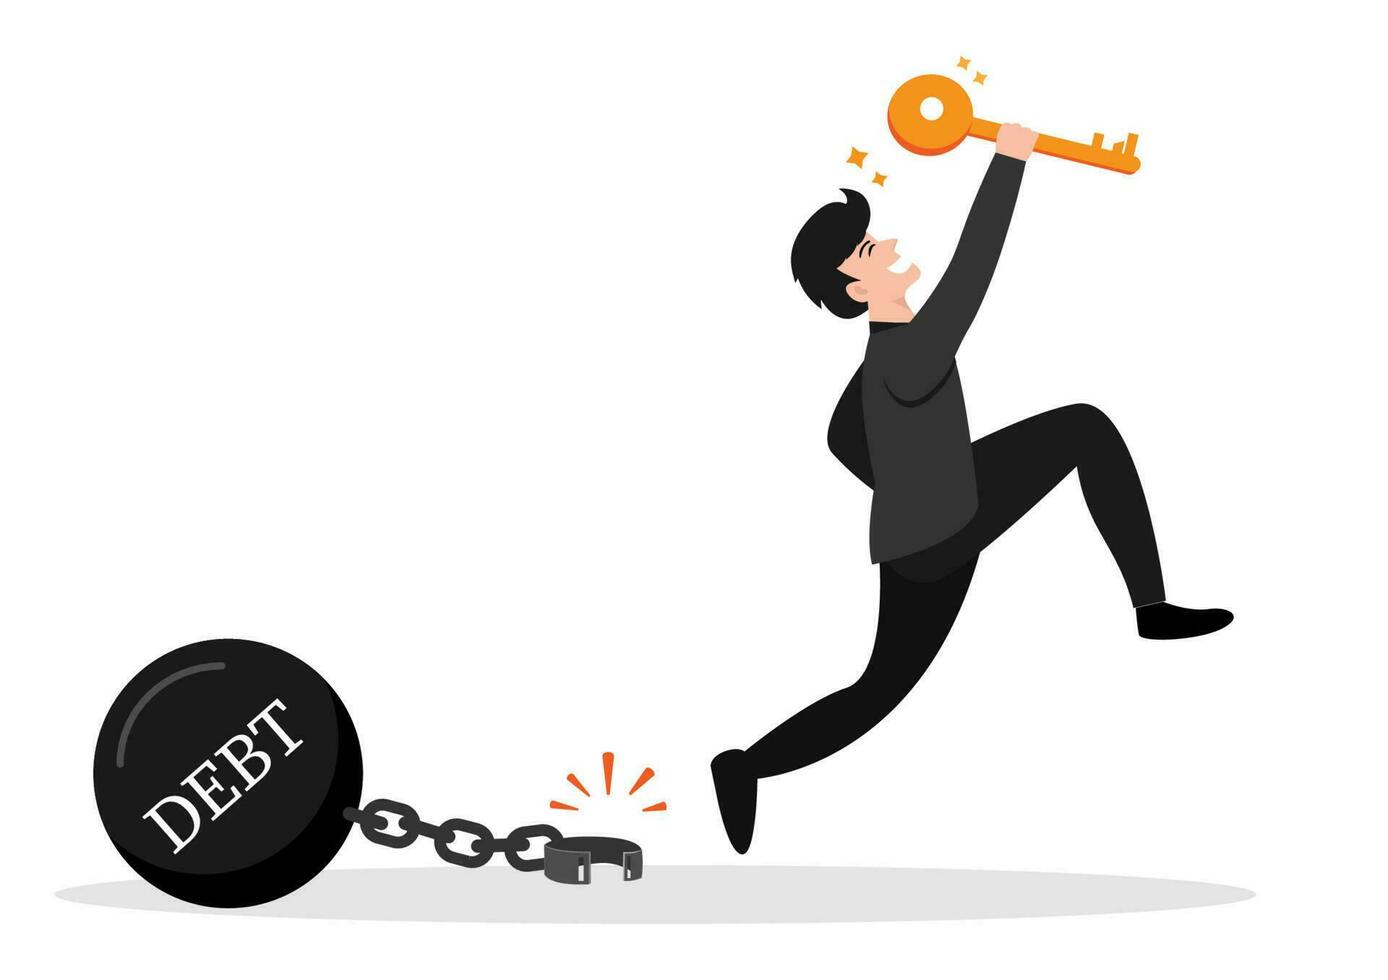 Debt free or freedom for pay off debts, loan or mortgage, solution to solve financial problem, savings or investment to break free, happy businessman holding golden key after unlock debt burden chain vector